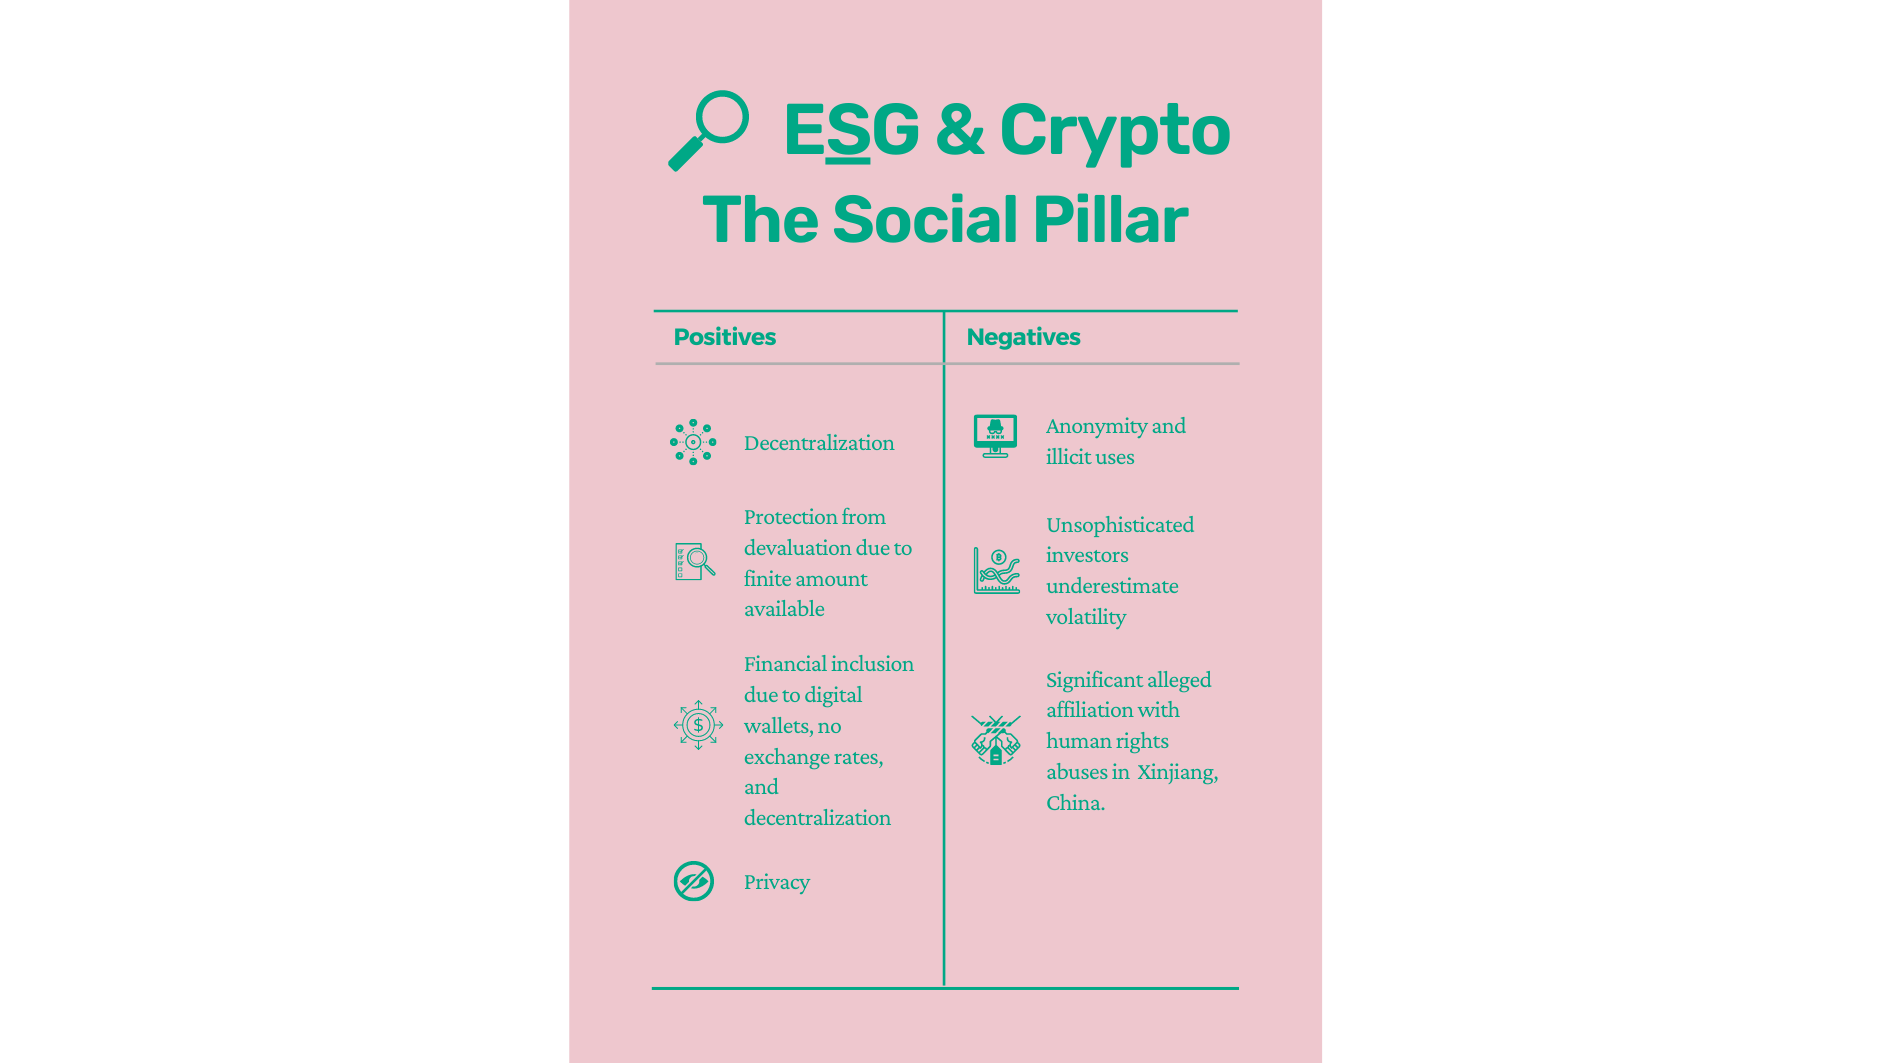 Overview of the social factors of ESG for cryptocurrency. Both positive and negative dimensions are described. There are several human rights concerns associated with cryptocurrency but these are countered by decentralization and privacy factors which are positive contributors.